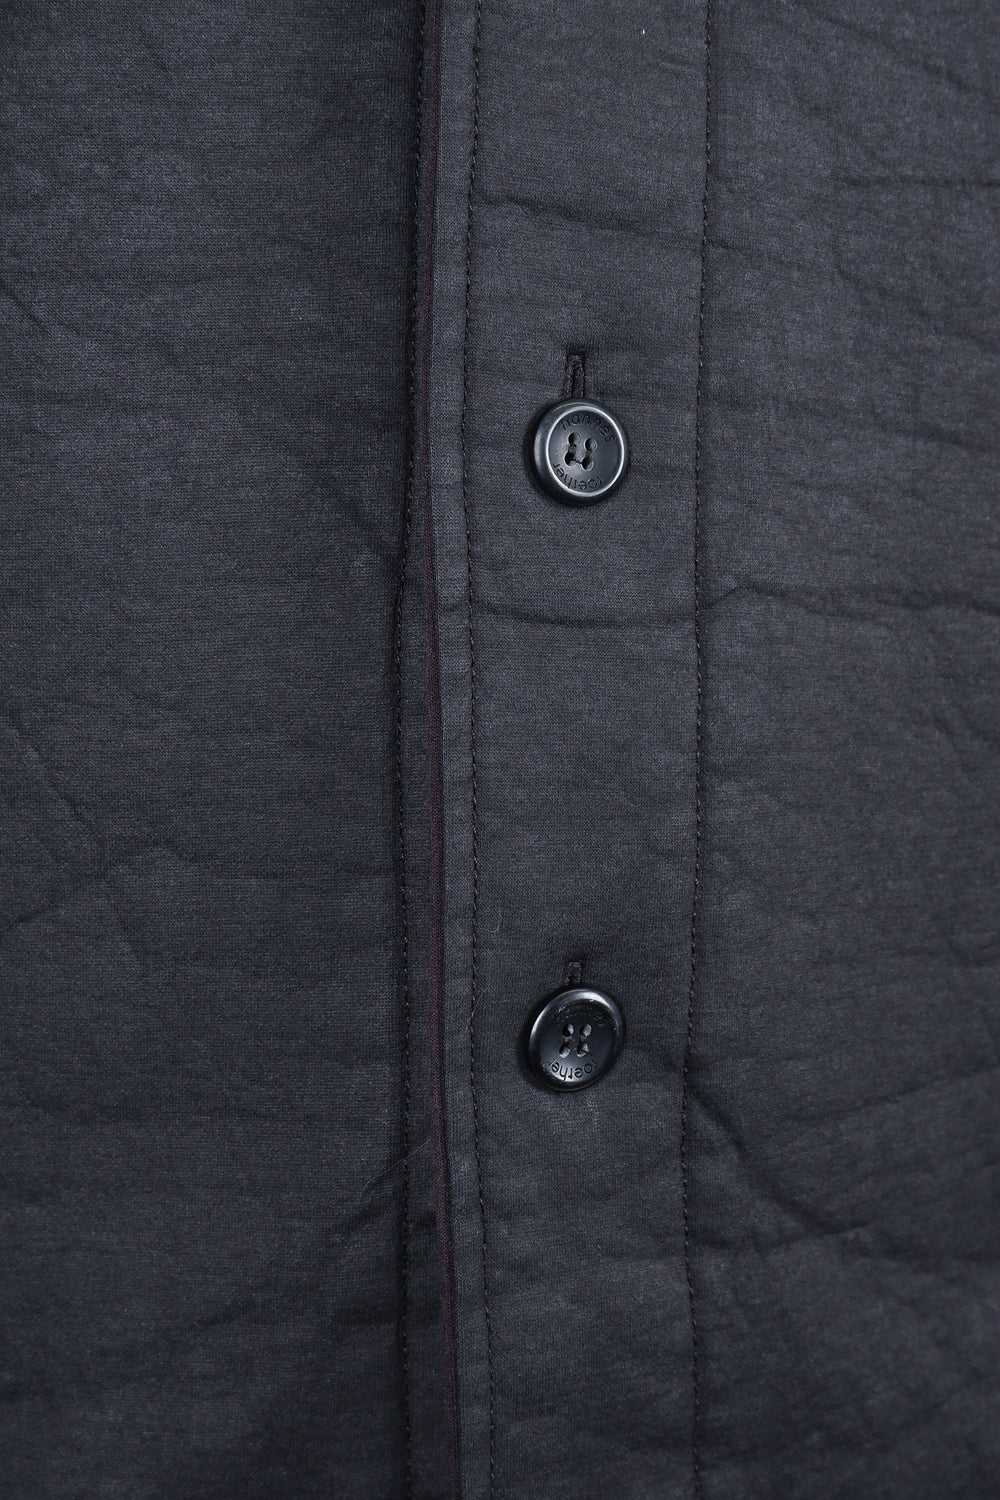 Buy the Hannes Roether Waxed Cotton Button-Up Hoodie in Black at Intro. Spend £50 for free UK delivery. Official stockists. We ship worldwide.